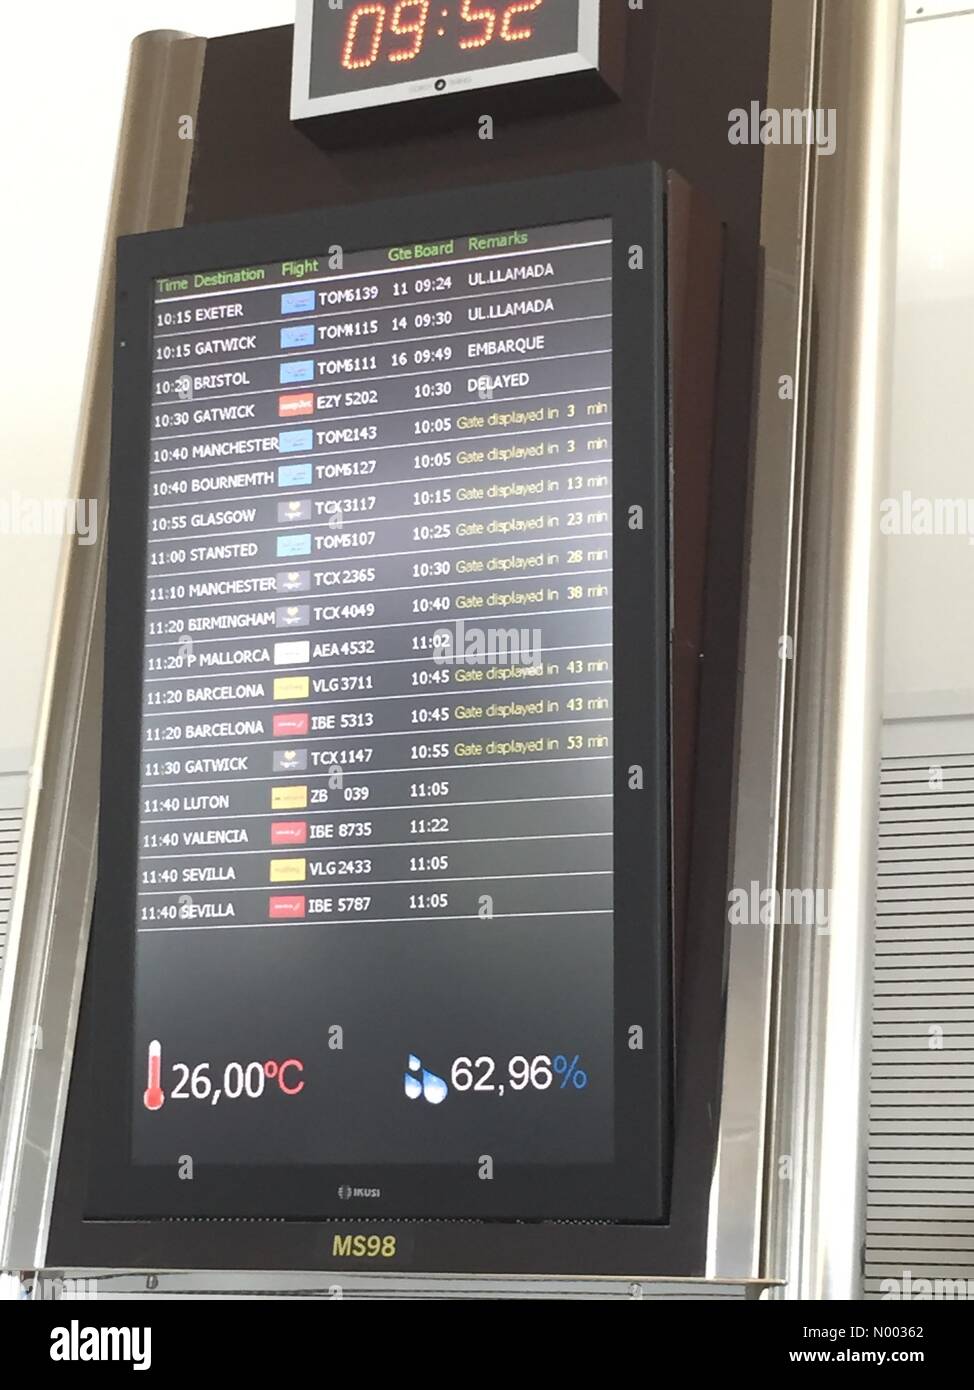 Mahón, Islas Baleares, Spain. 08th June, 2015. Monday 8th June - Menorca airport - departures board showing flight to London Gatwick as delayed due to impending strike action Credit:  DanFisher/StockimoNews/Alamy Live News Stock Photo